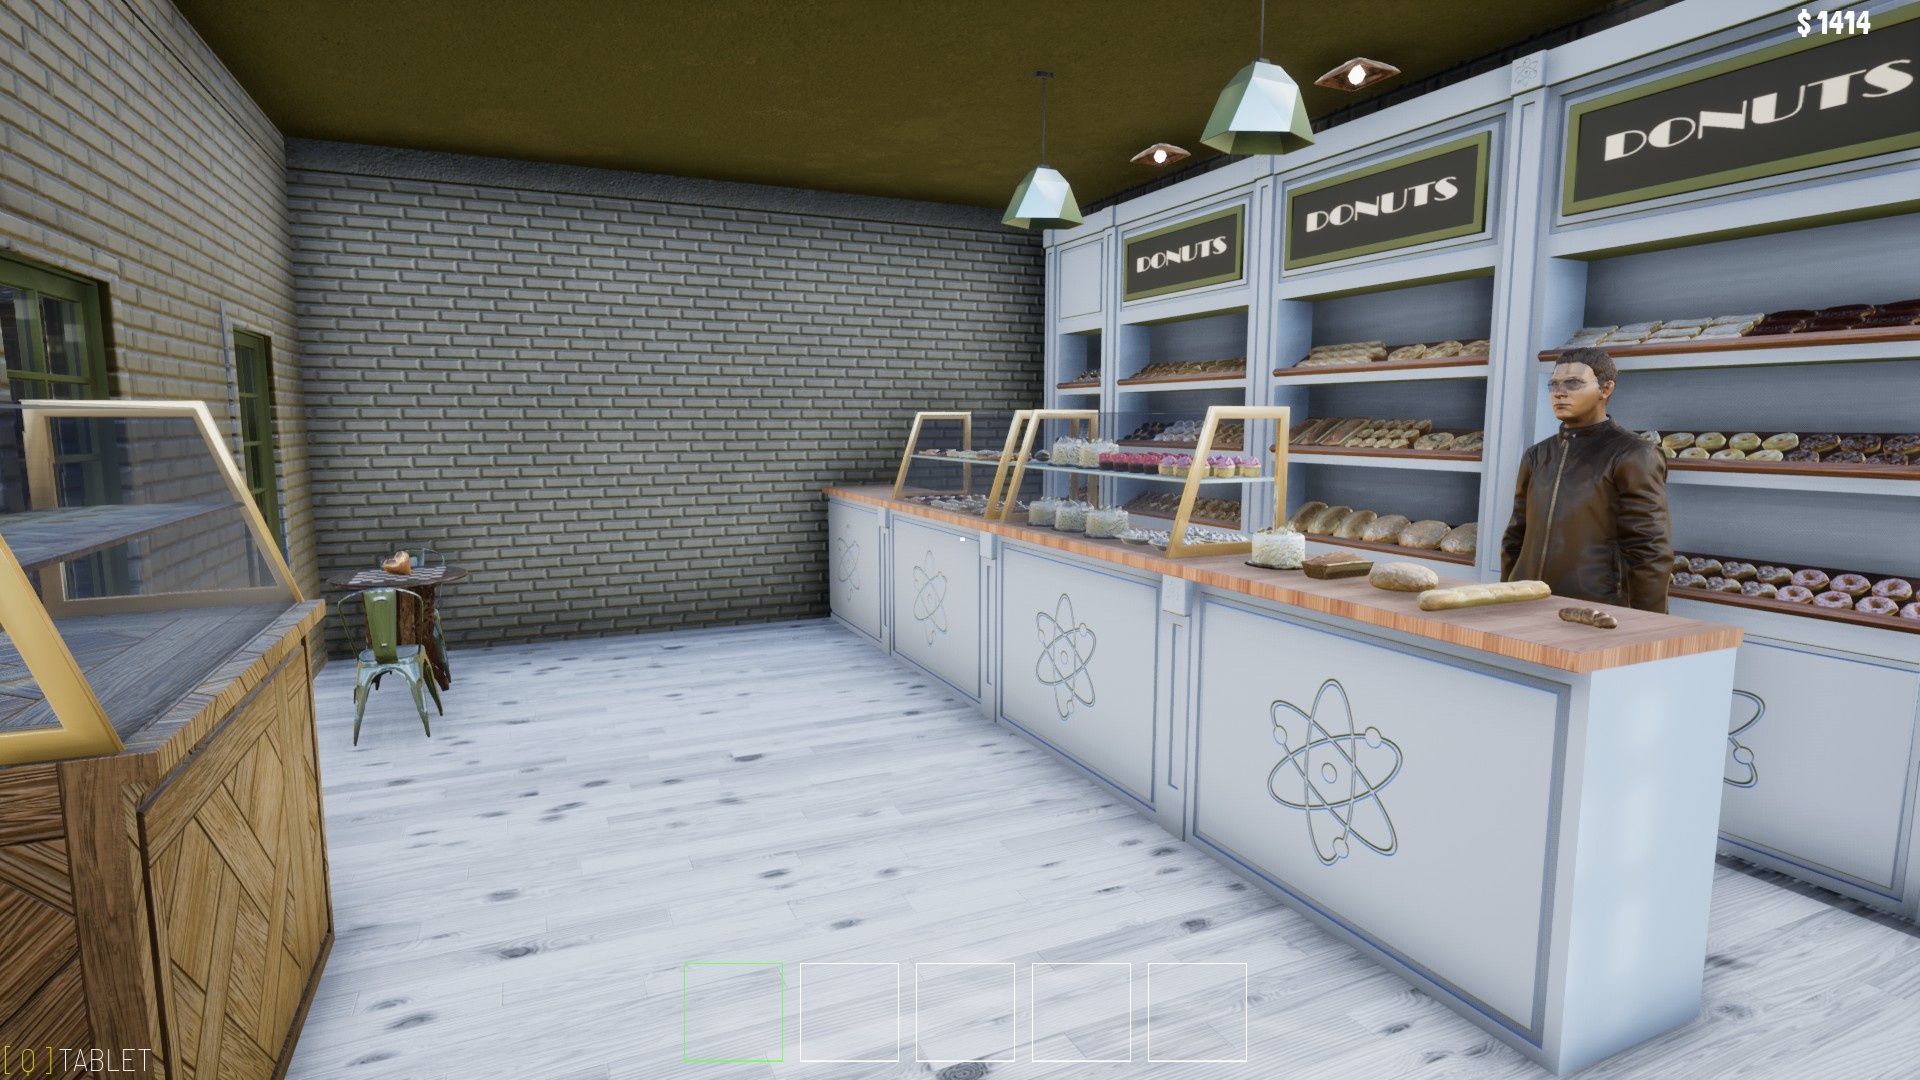 (At Atomic Bakery we buy a few types of bread just one of the buildings suffering from totally inappropriate design).